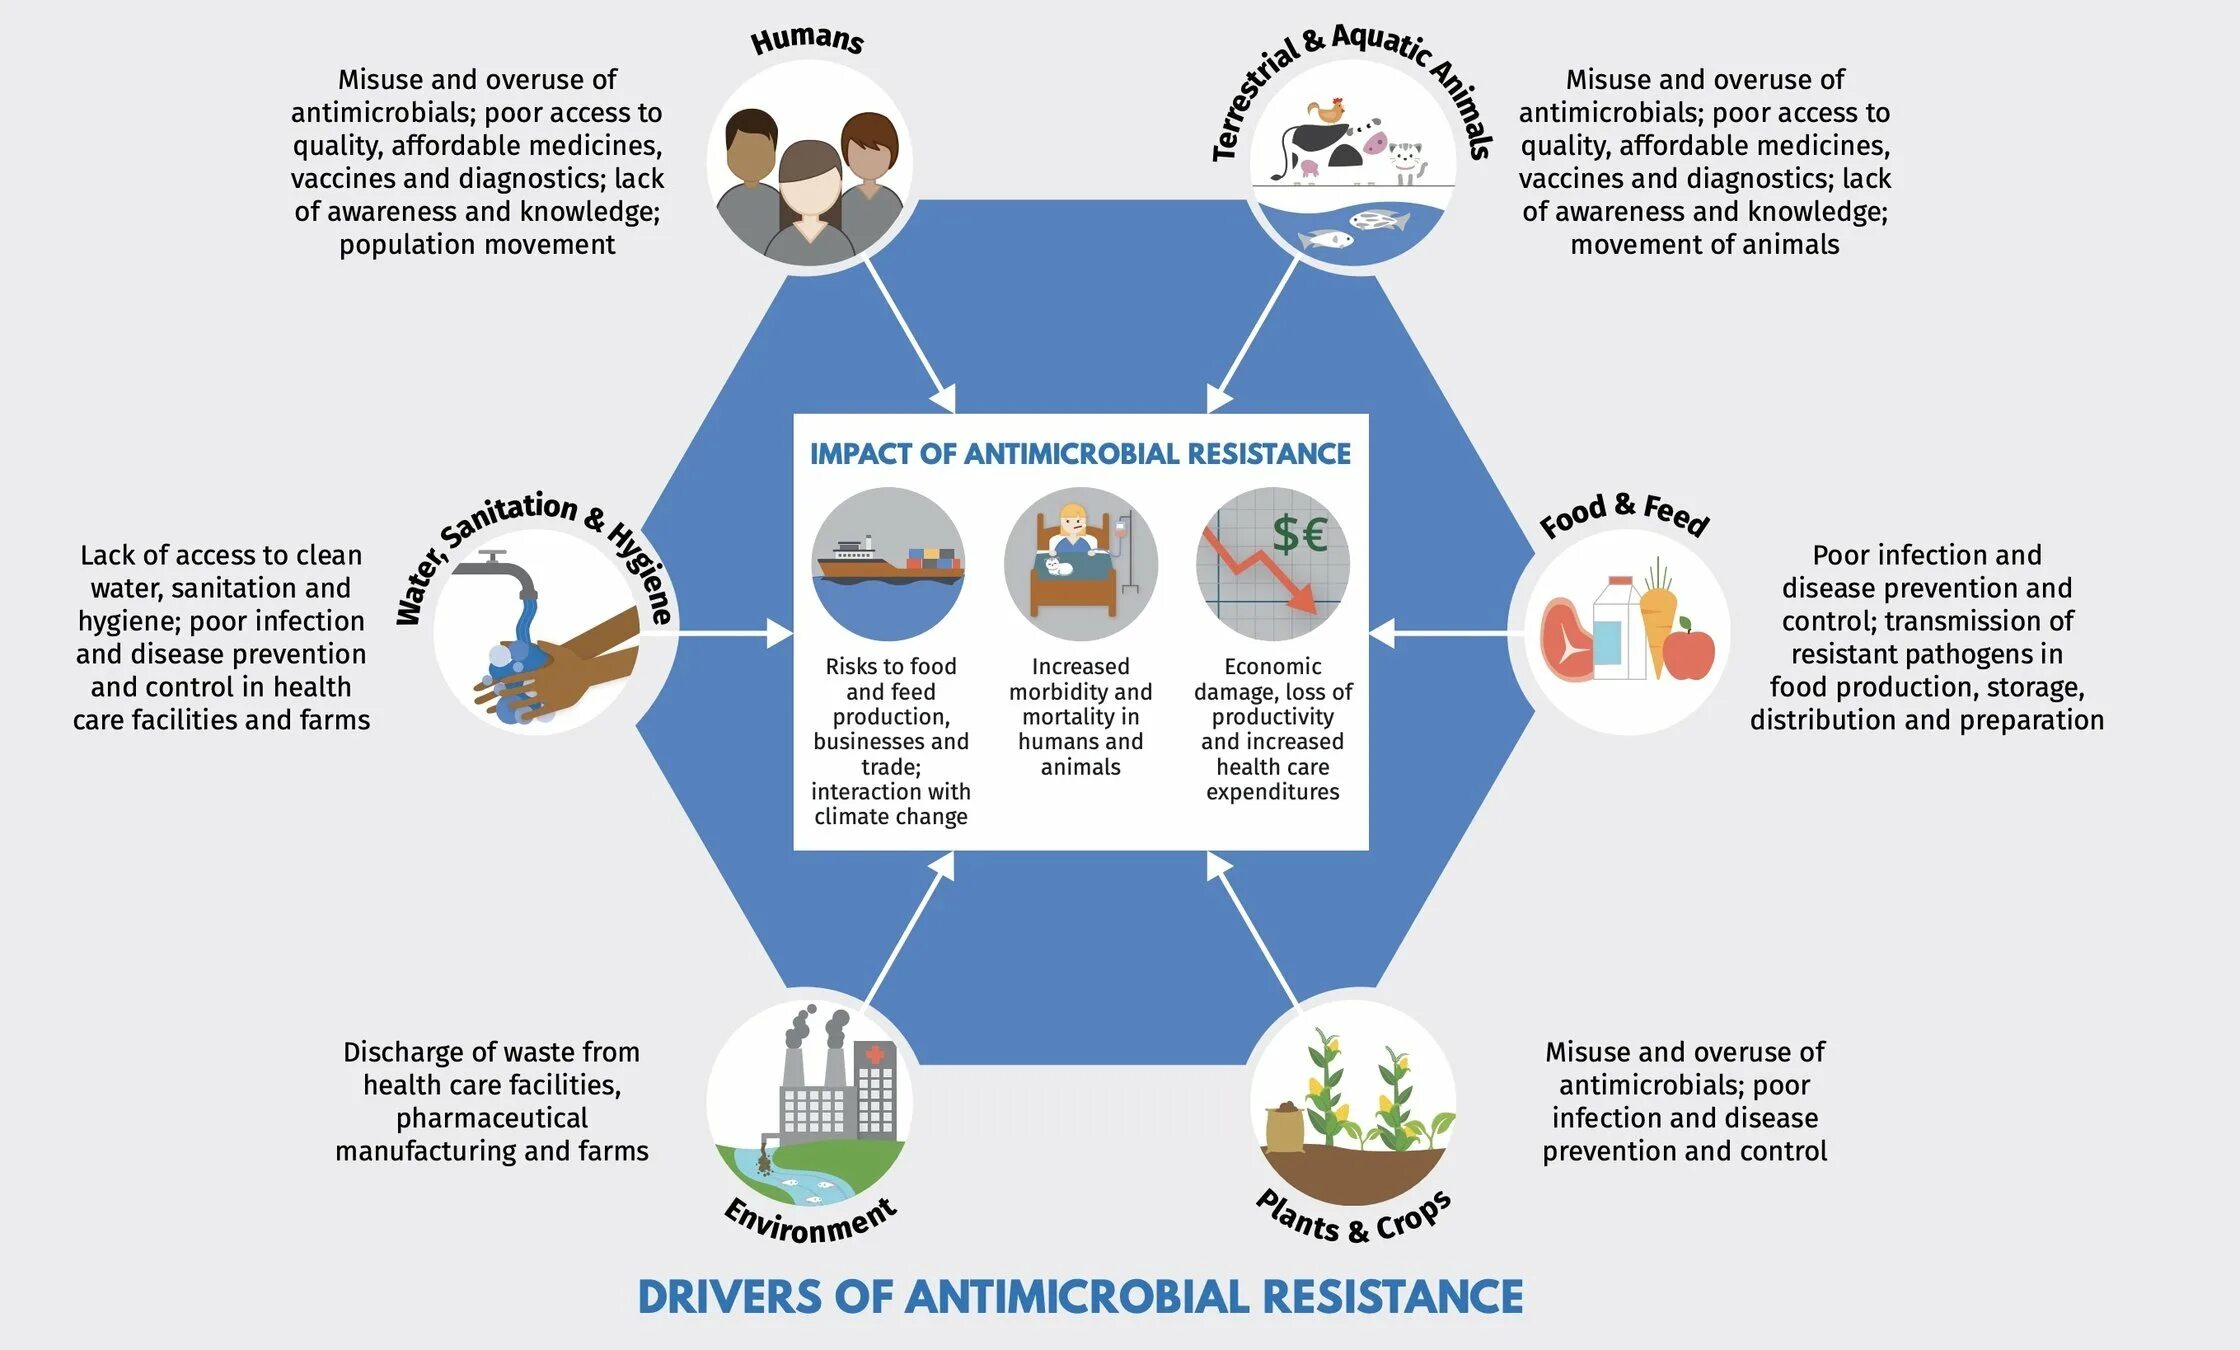 Resist and disorder. Antimicrobial Resistance. One Health. Drug-Resistant infections. Healthcare waste Management & infection Prevention and Control.